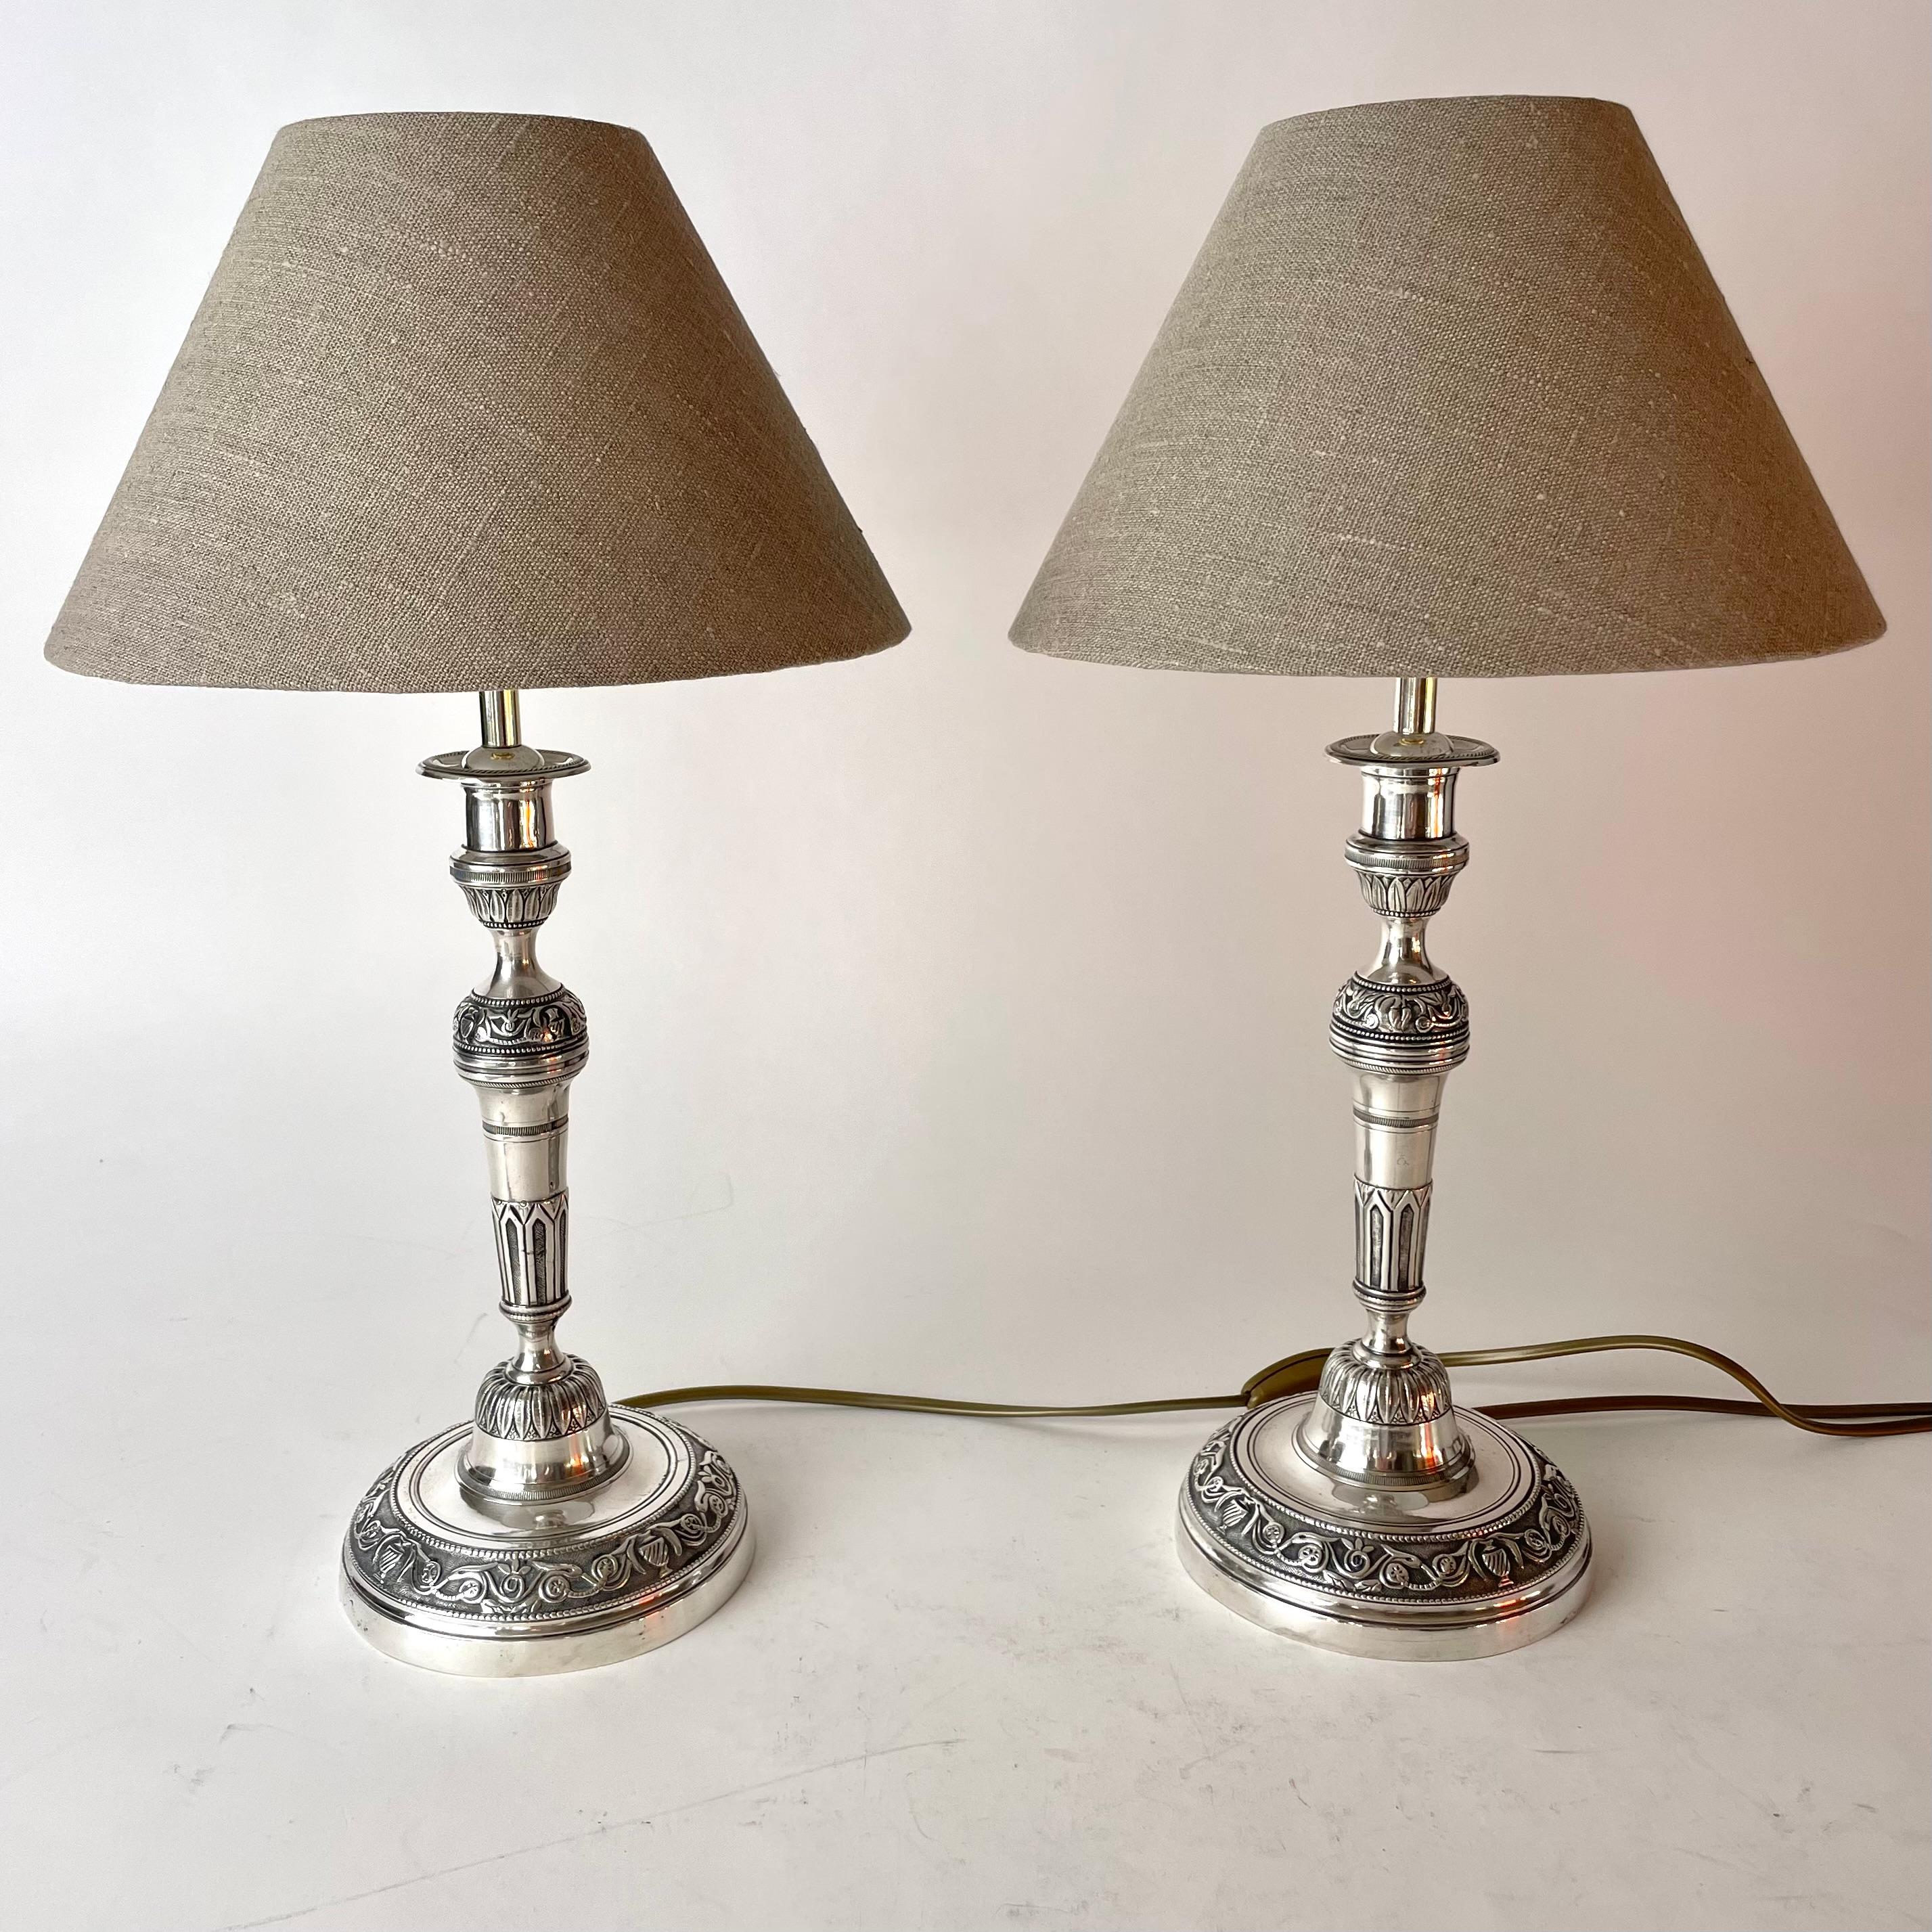 Silvered Elegant pair of Empire Table Lamps, originally candlesticks from the 1820s For Sale